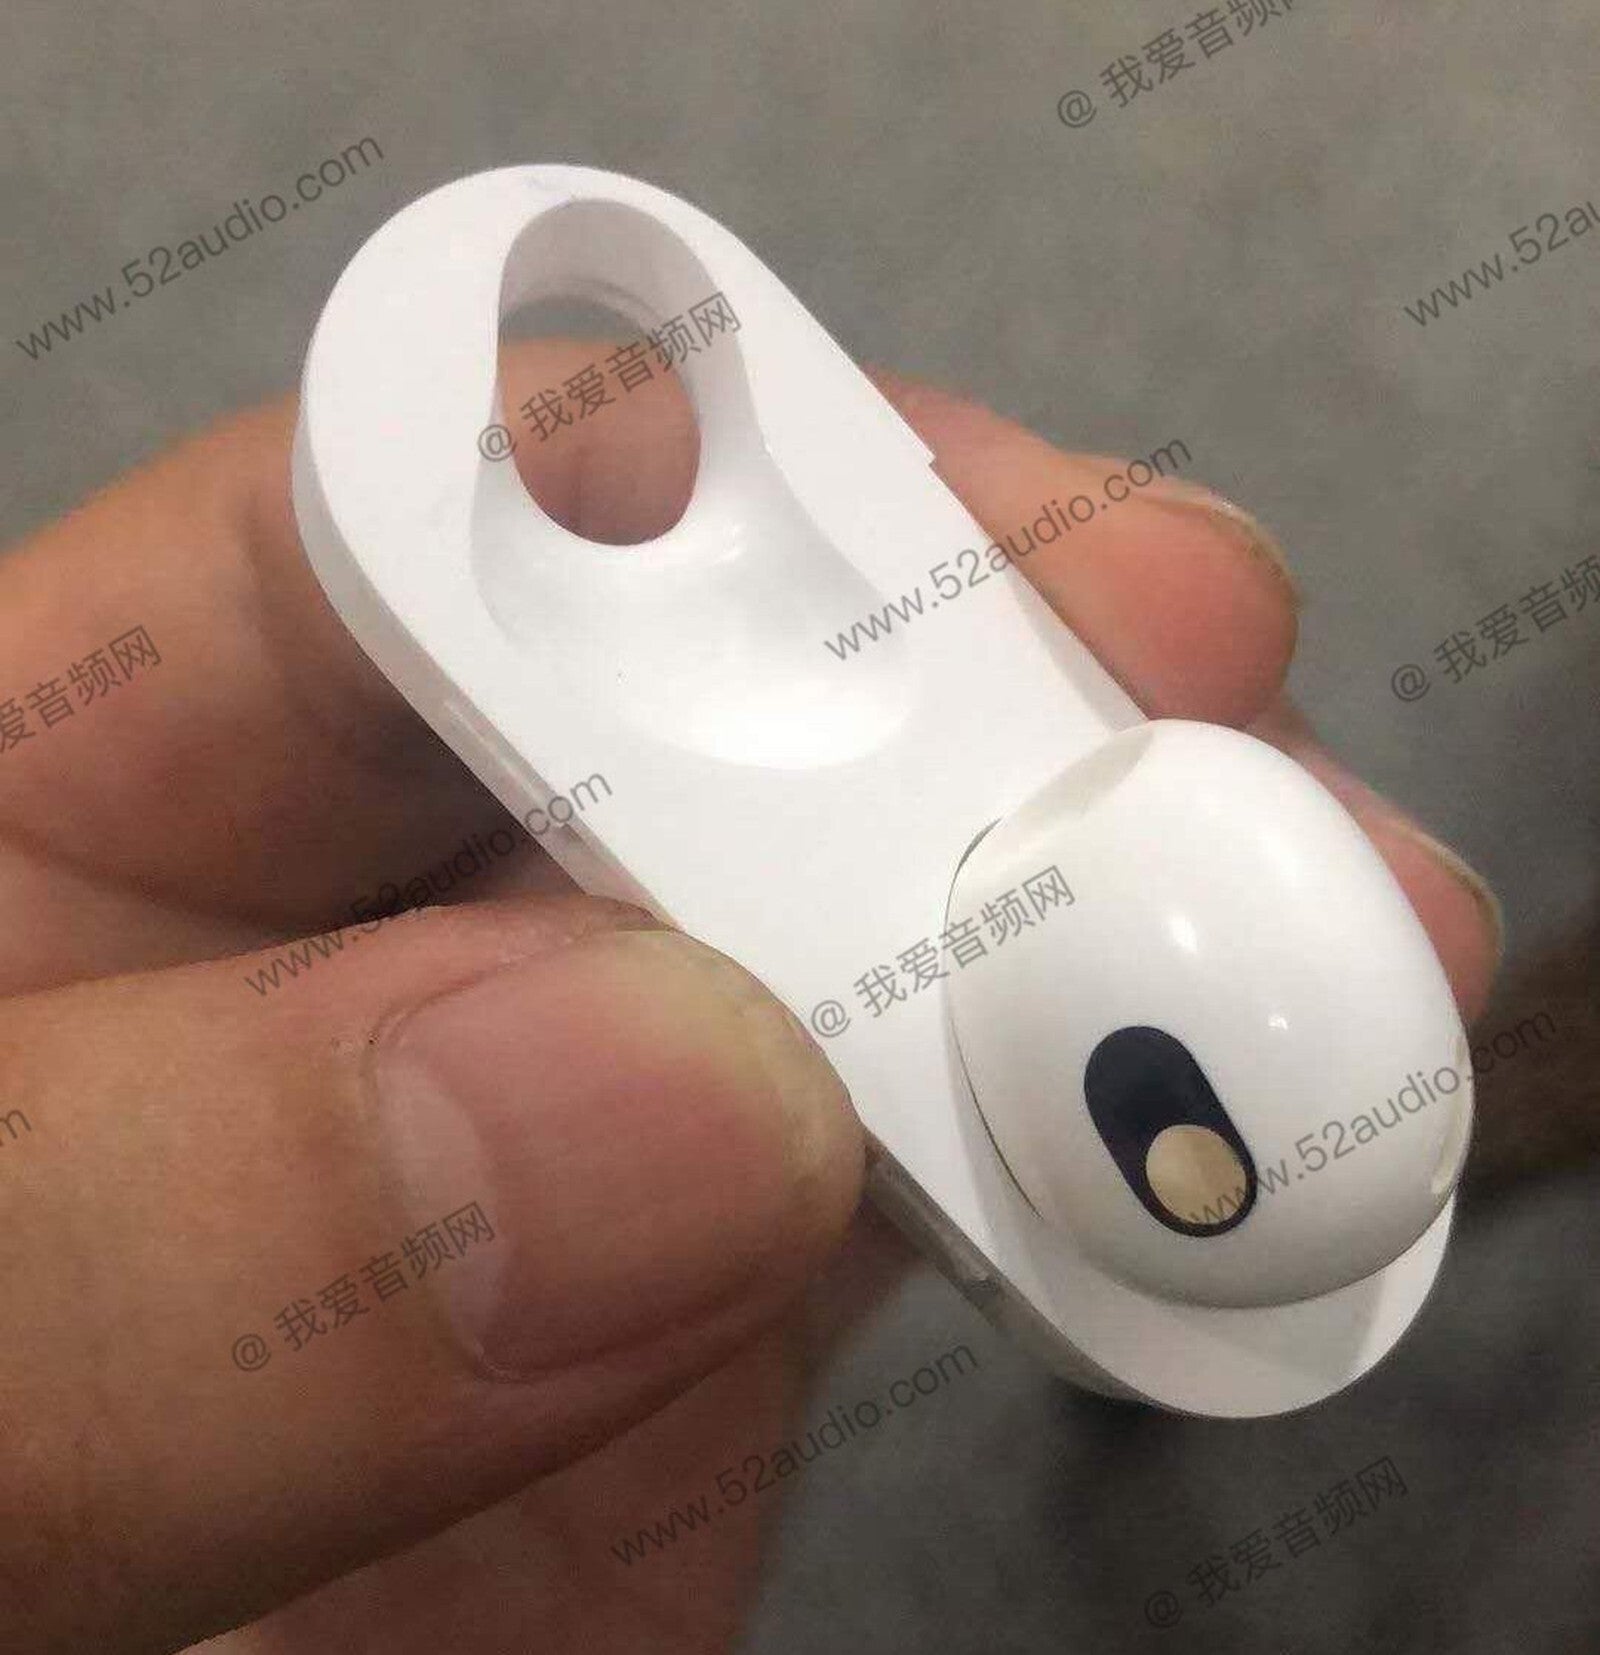 Image allegedly shows the AirPods 3 charging cockpit shell - Check out an alleged render of AirPods 3 using a &quot;Pro&quot; design with a shorter stem